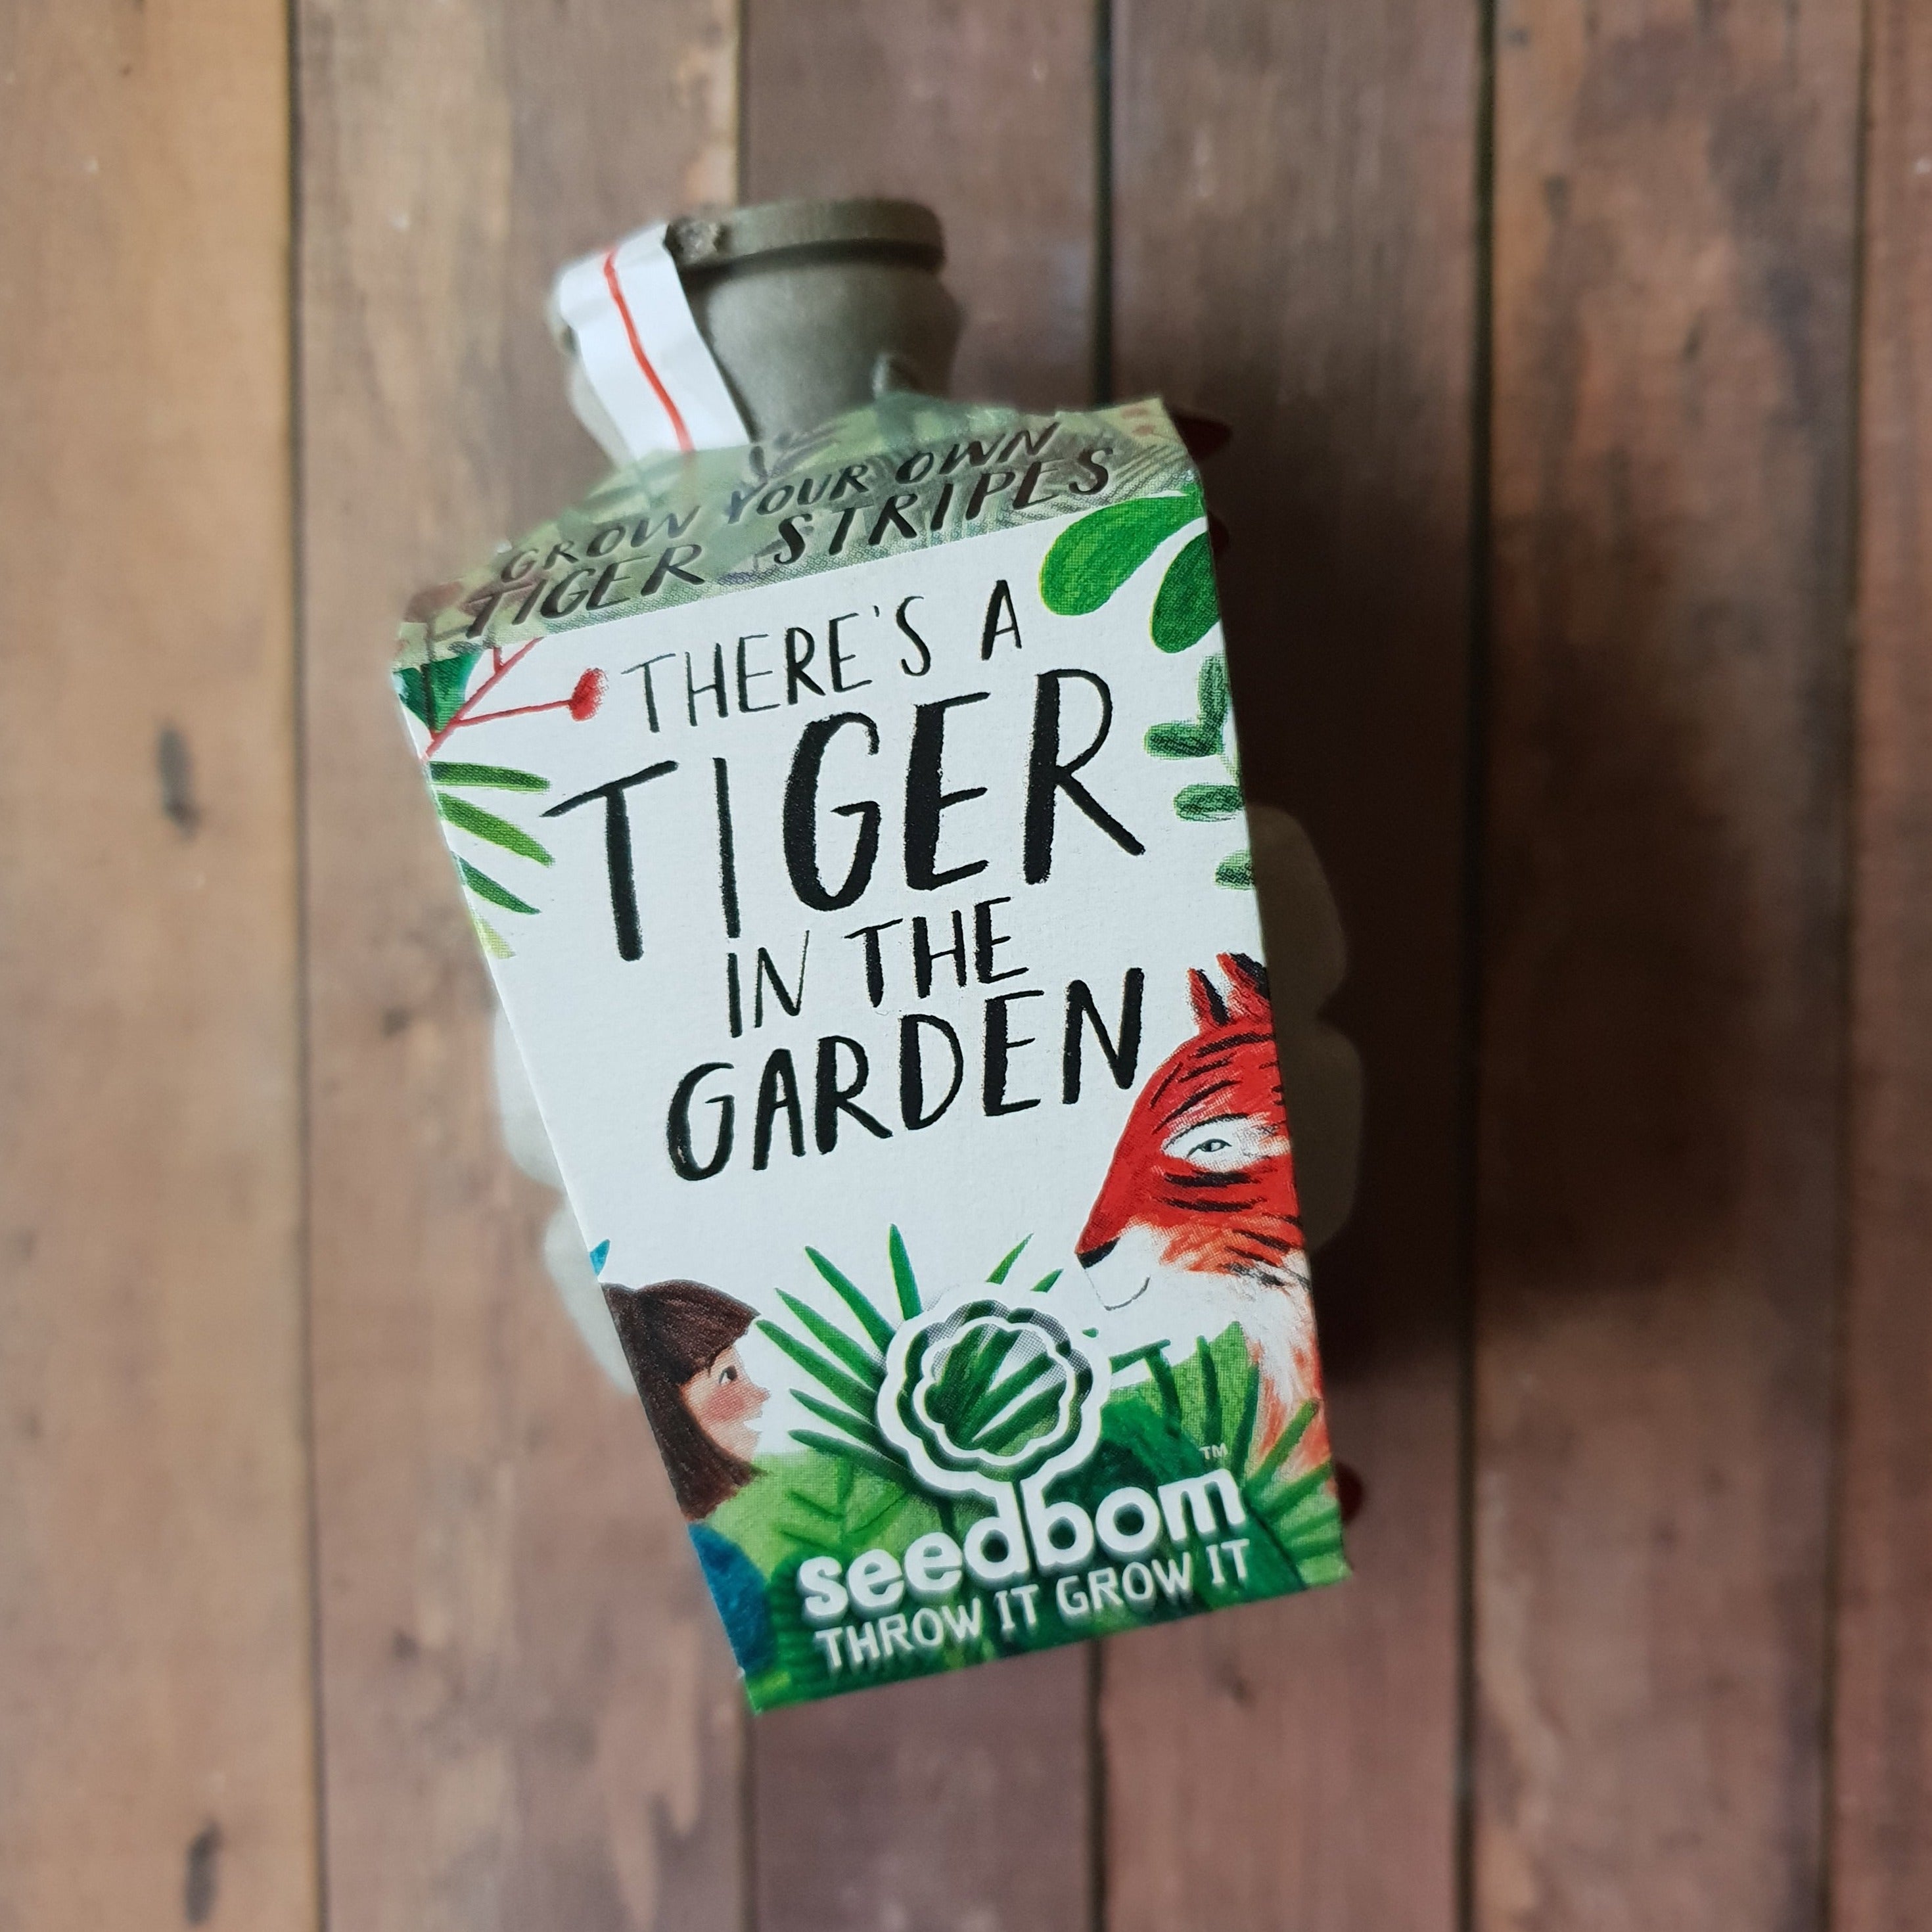 Kabloom Seedbom - There's a Tiger in the Garden!